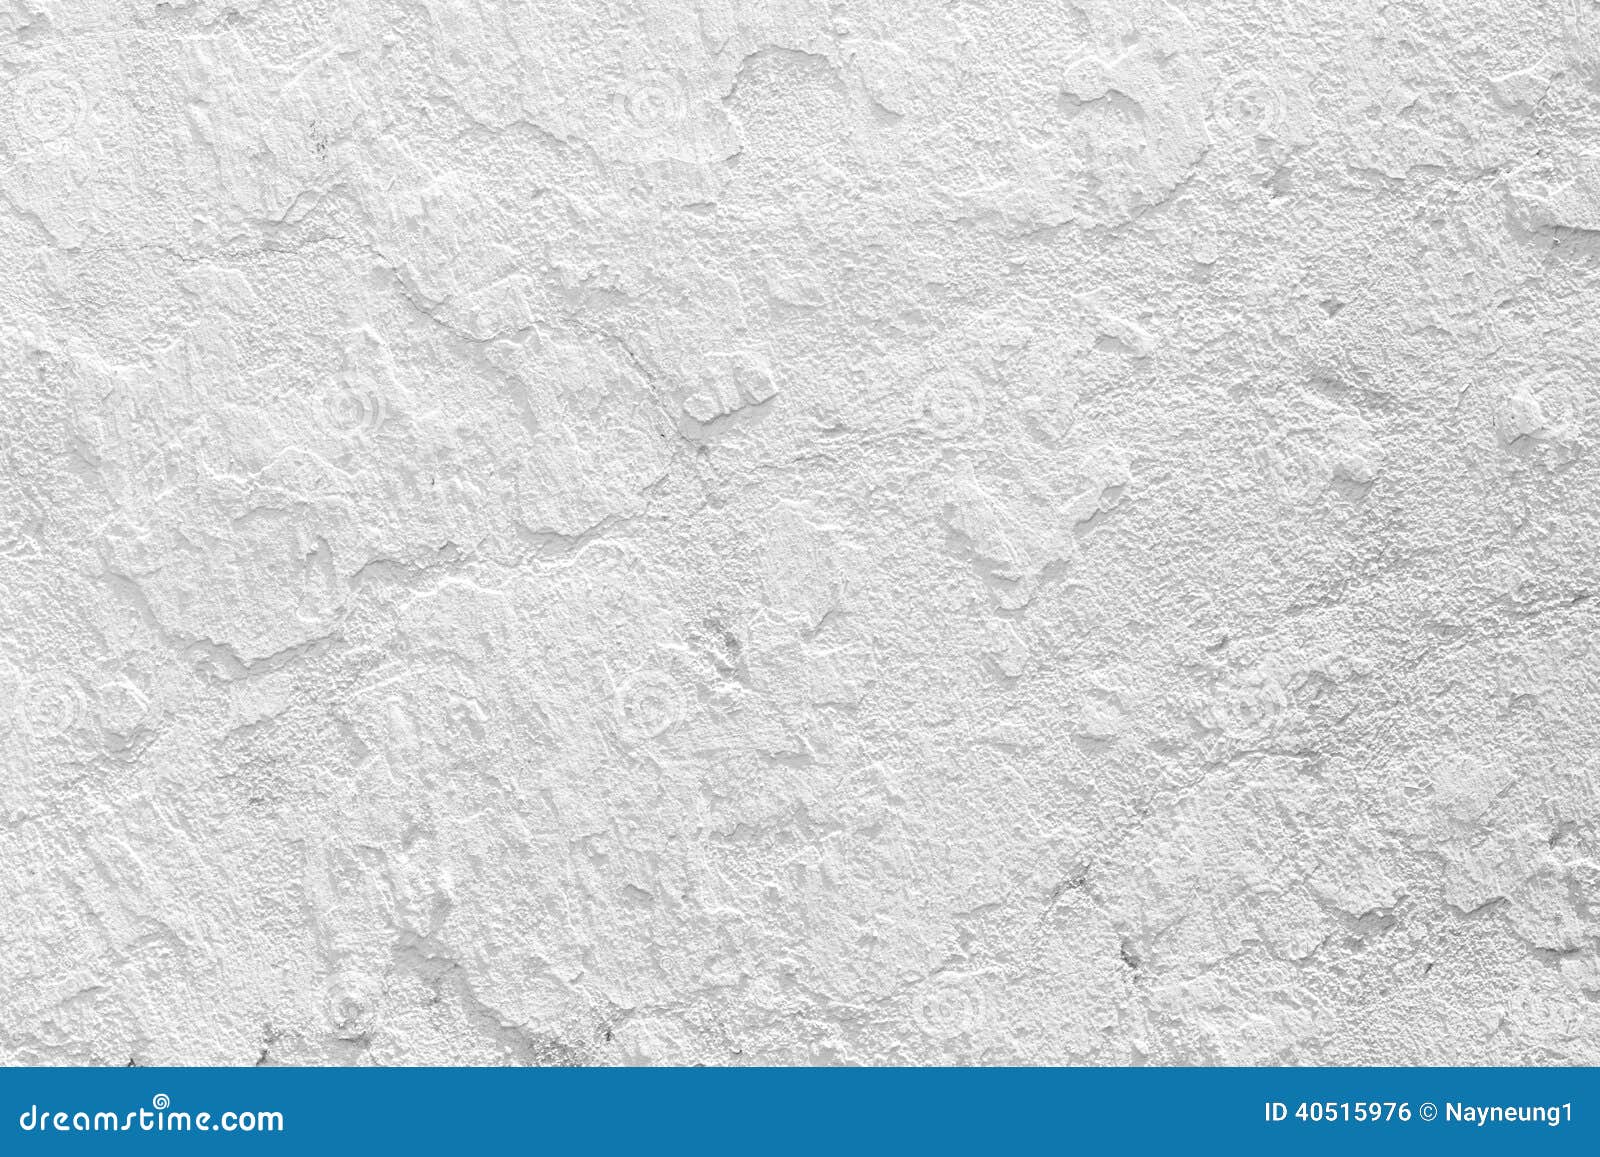 Closeup Grunge Texture White Paint Cement Wall. Stock Photo - Image